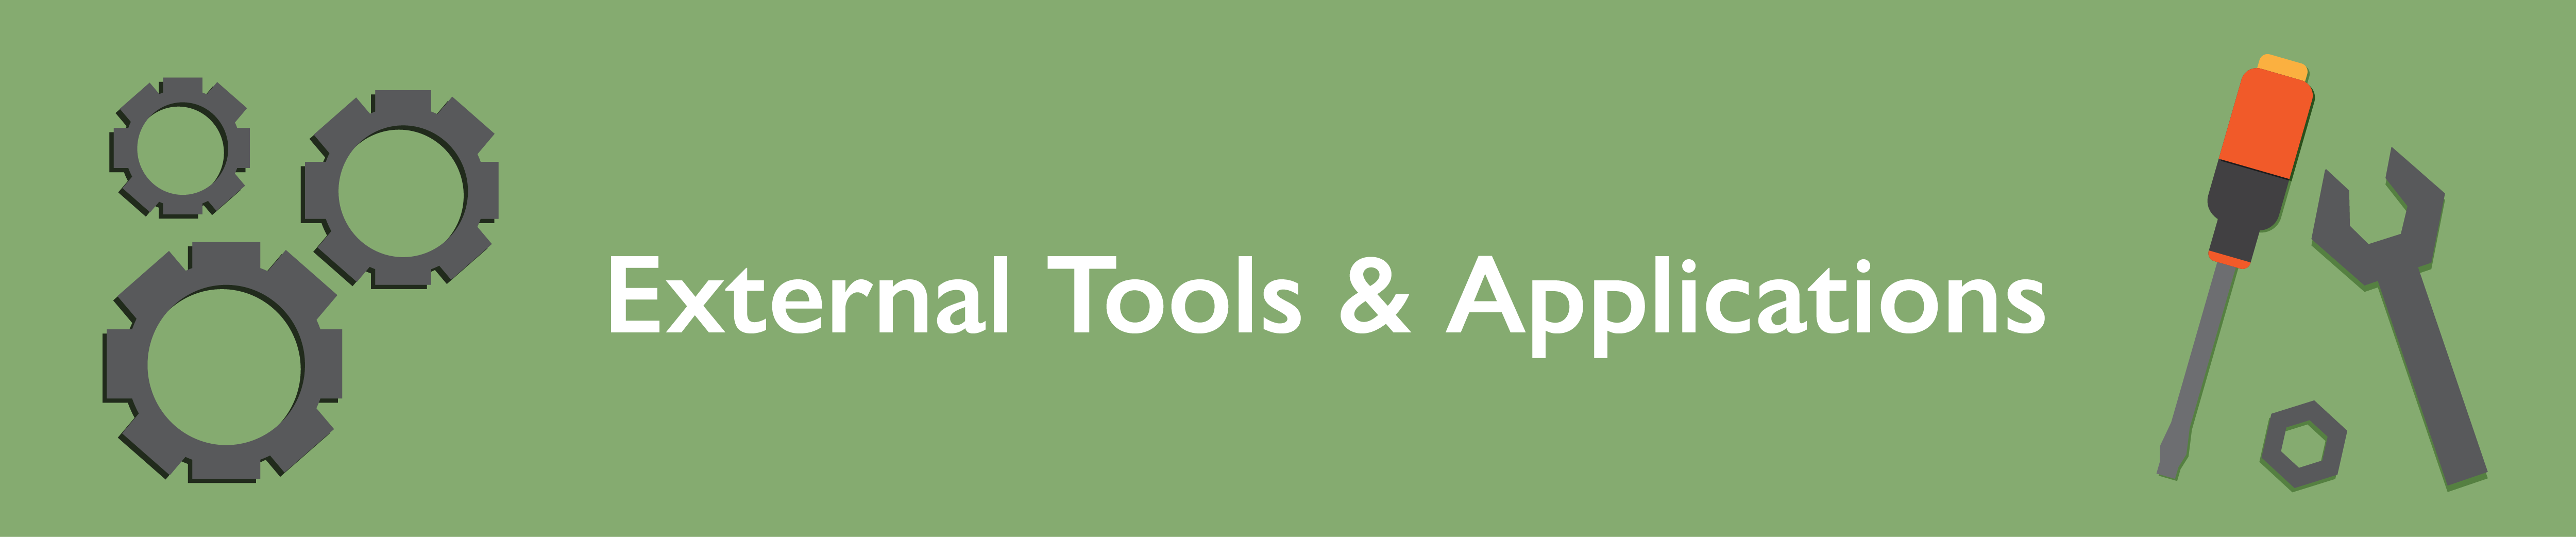 Image graphic for "external tools and applications"